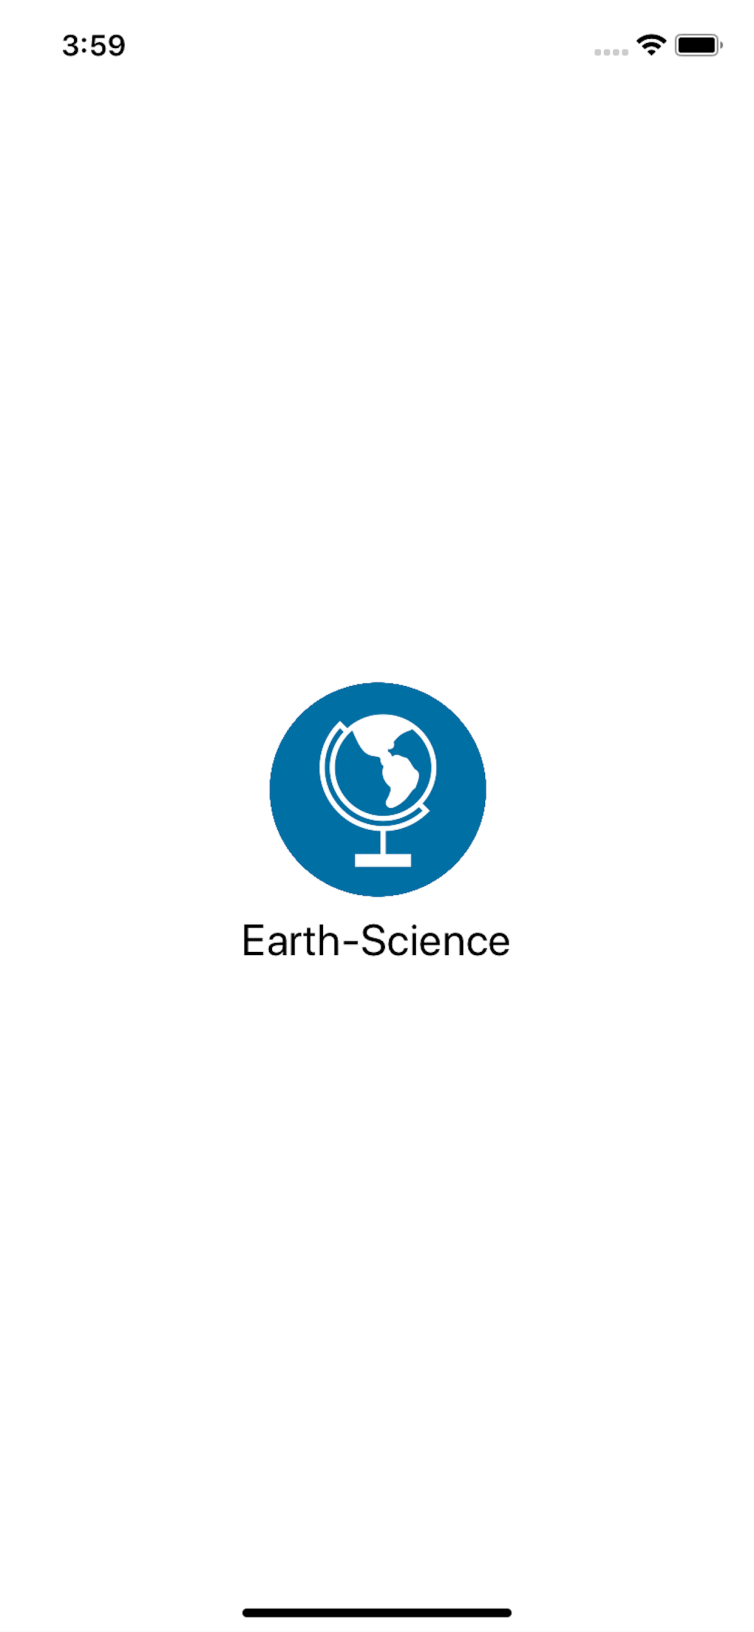 Earth-Science